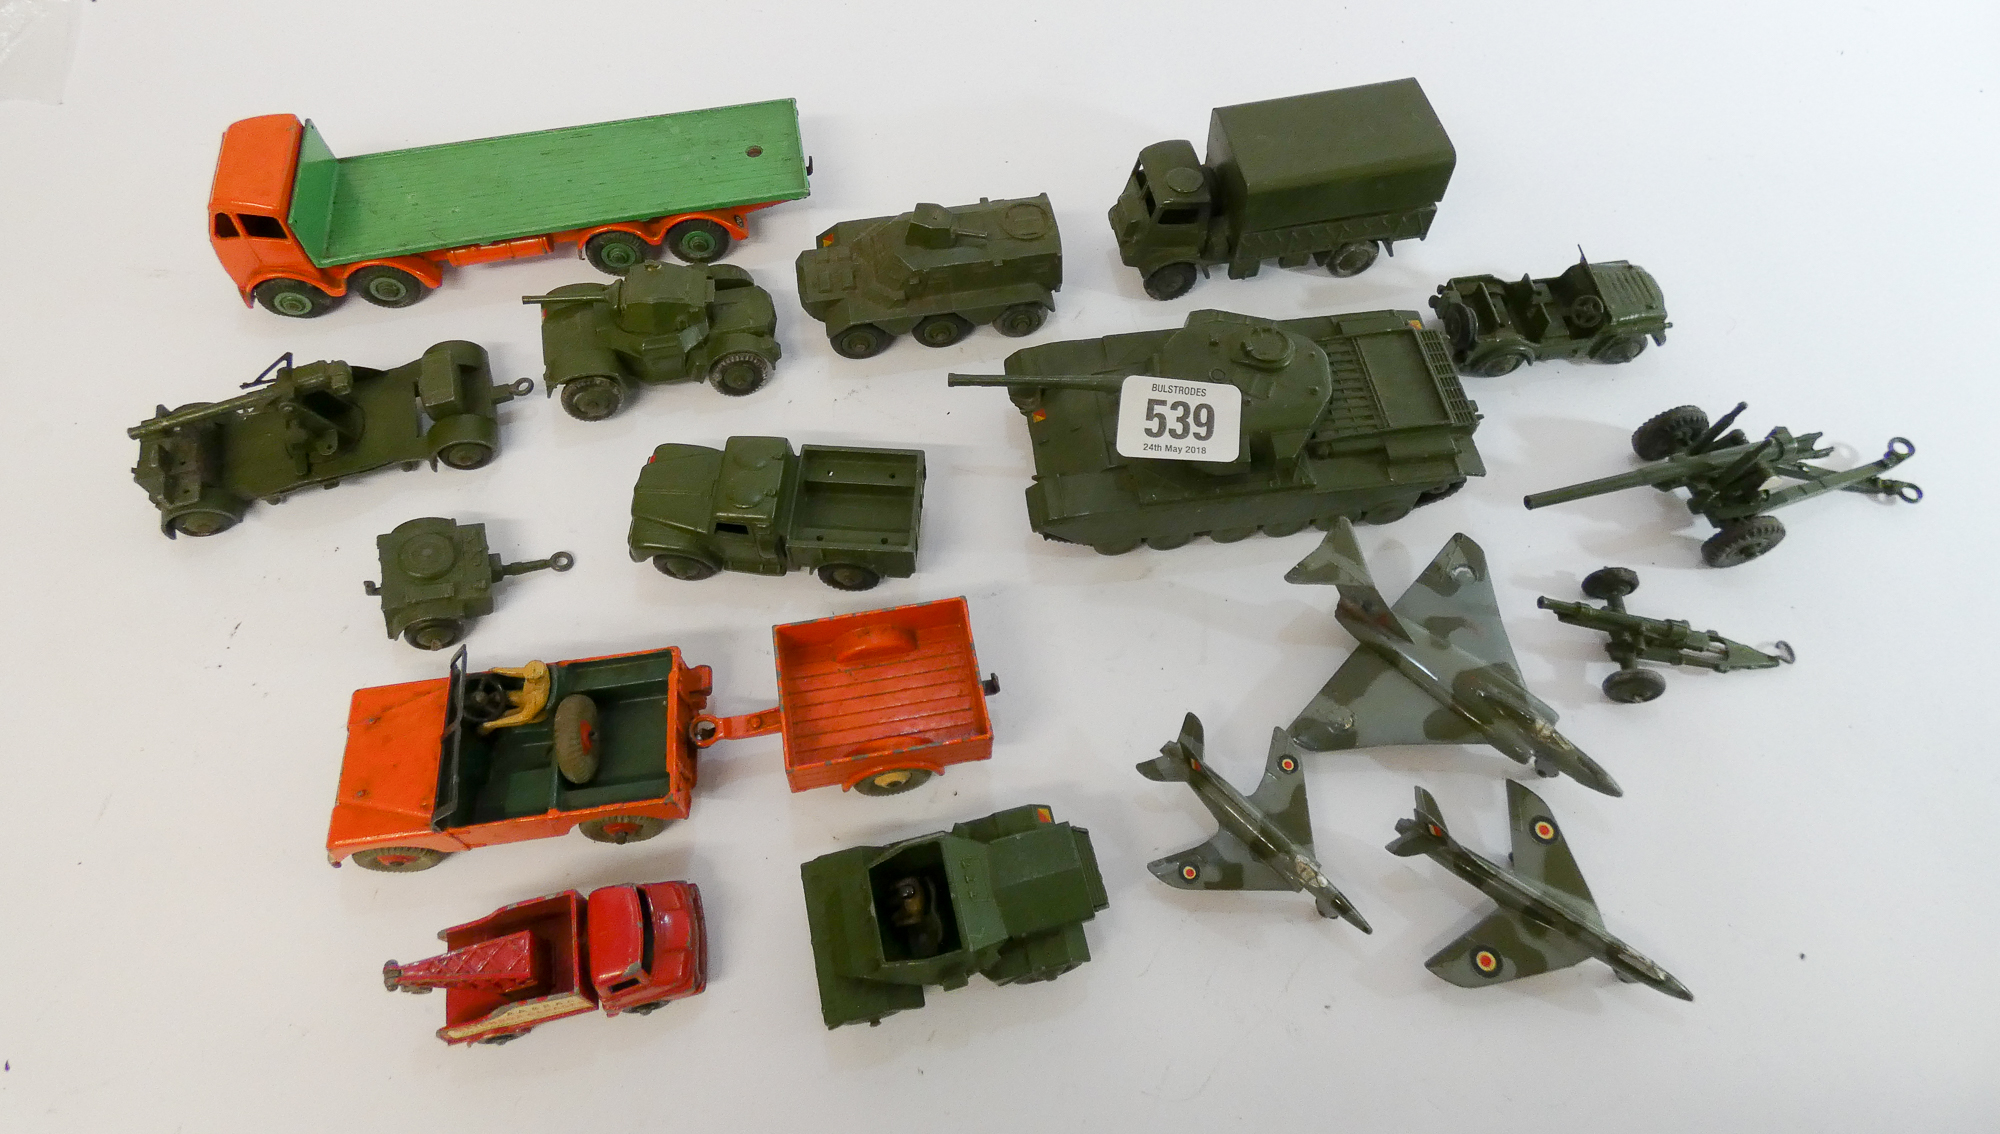 A small collection of Dinky cars and toys, mostly military items such as tanks, guns,